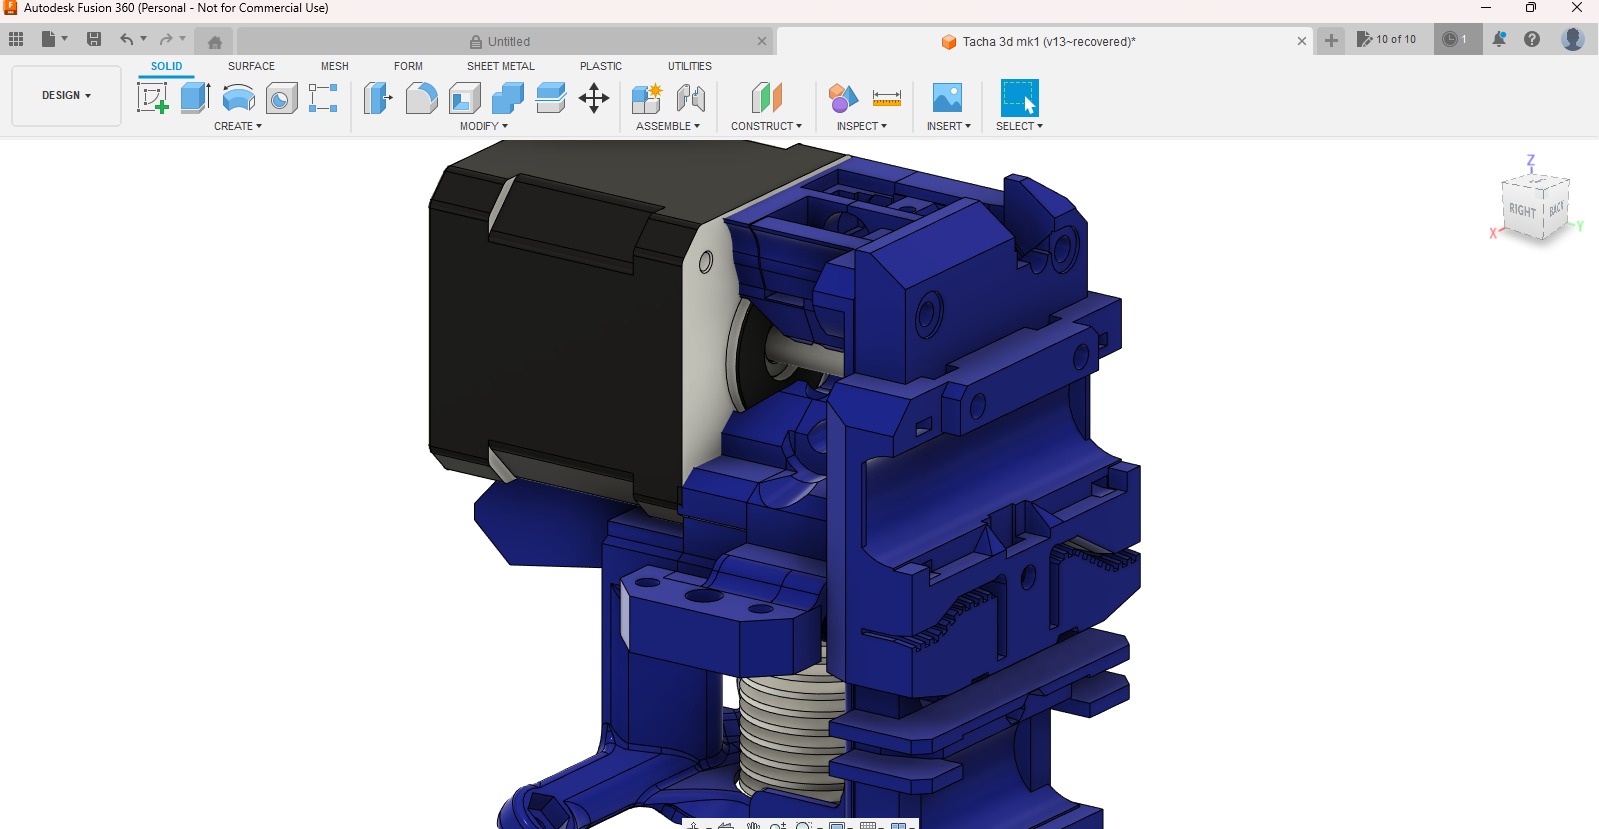 Autodesk Fusion 360 (Personal - Not for Commercial Use) 6_29_2023 10_04_54 PM.png